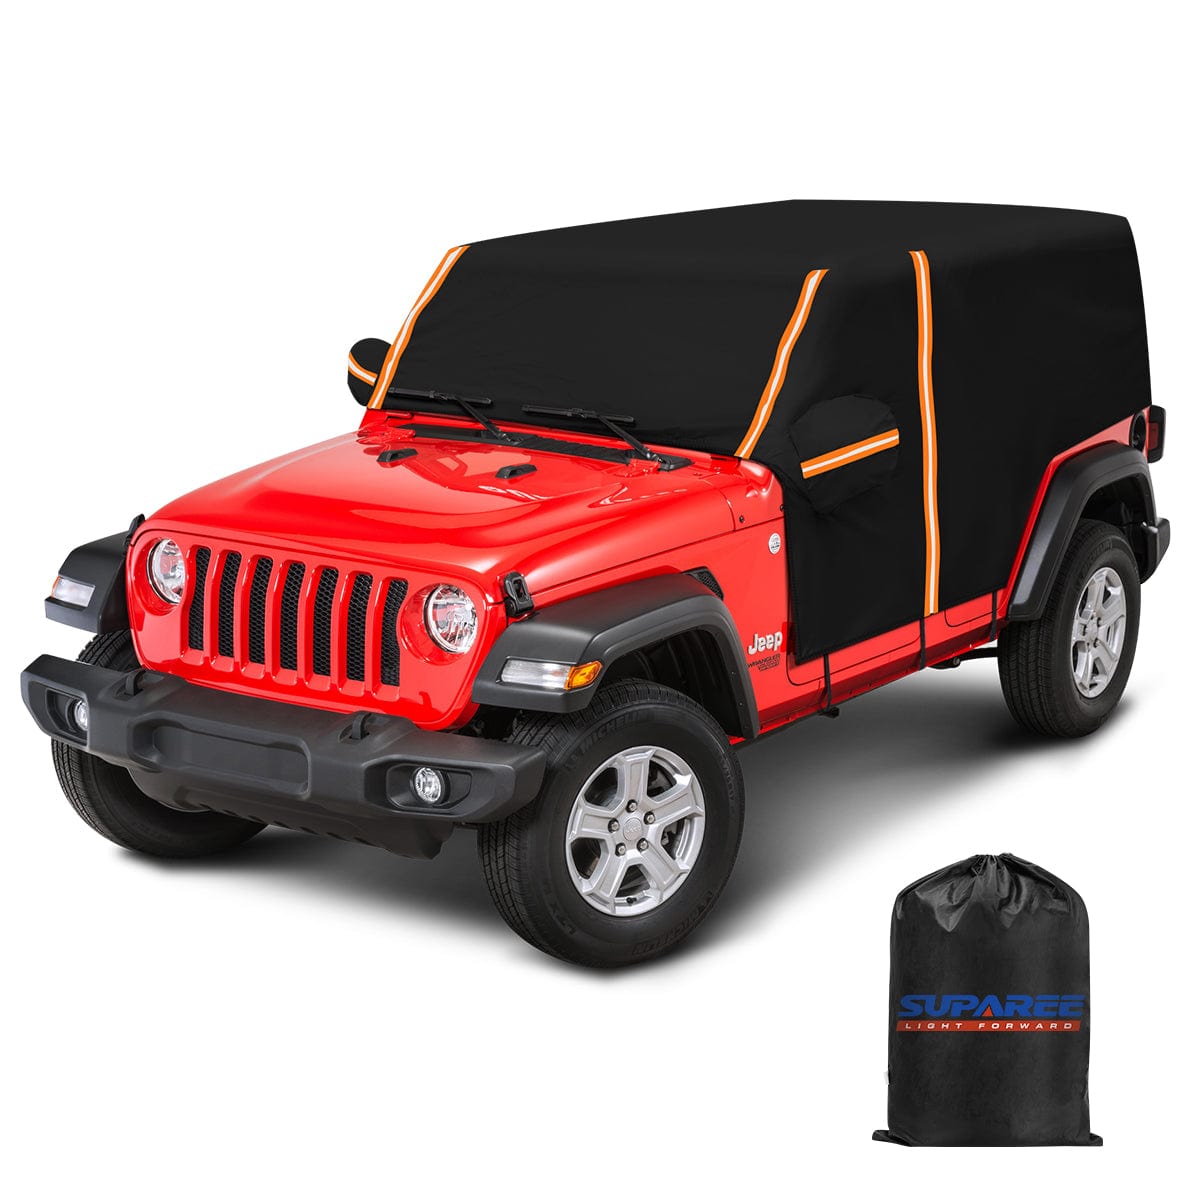 SUPAREE Jeep Cover Black Suparee Jeep Cab Cover Waterproof for 2007-Later Wrangler JK JL 4 Door Product description